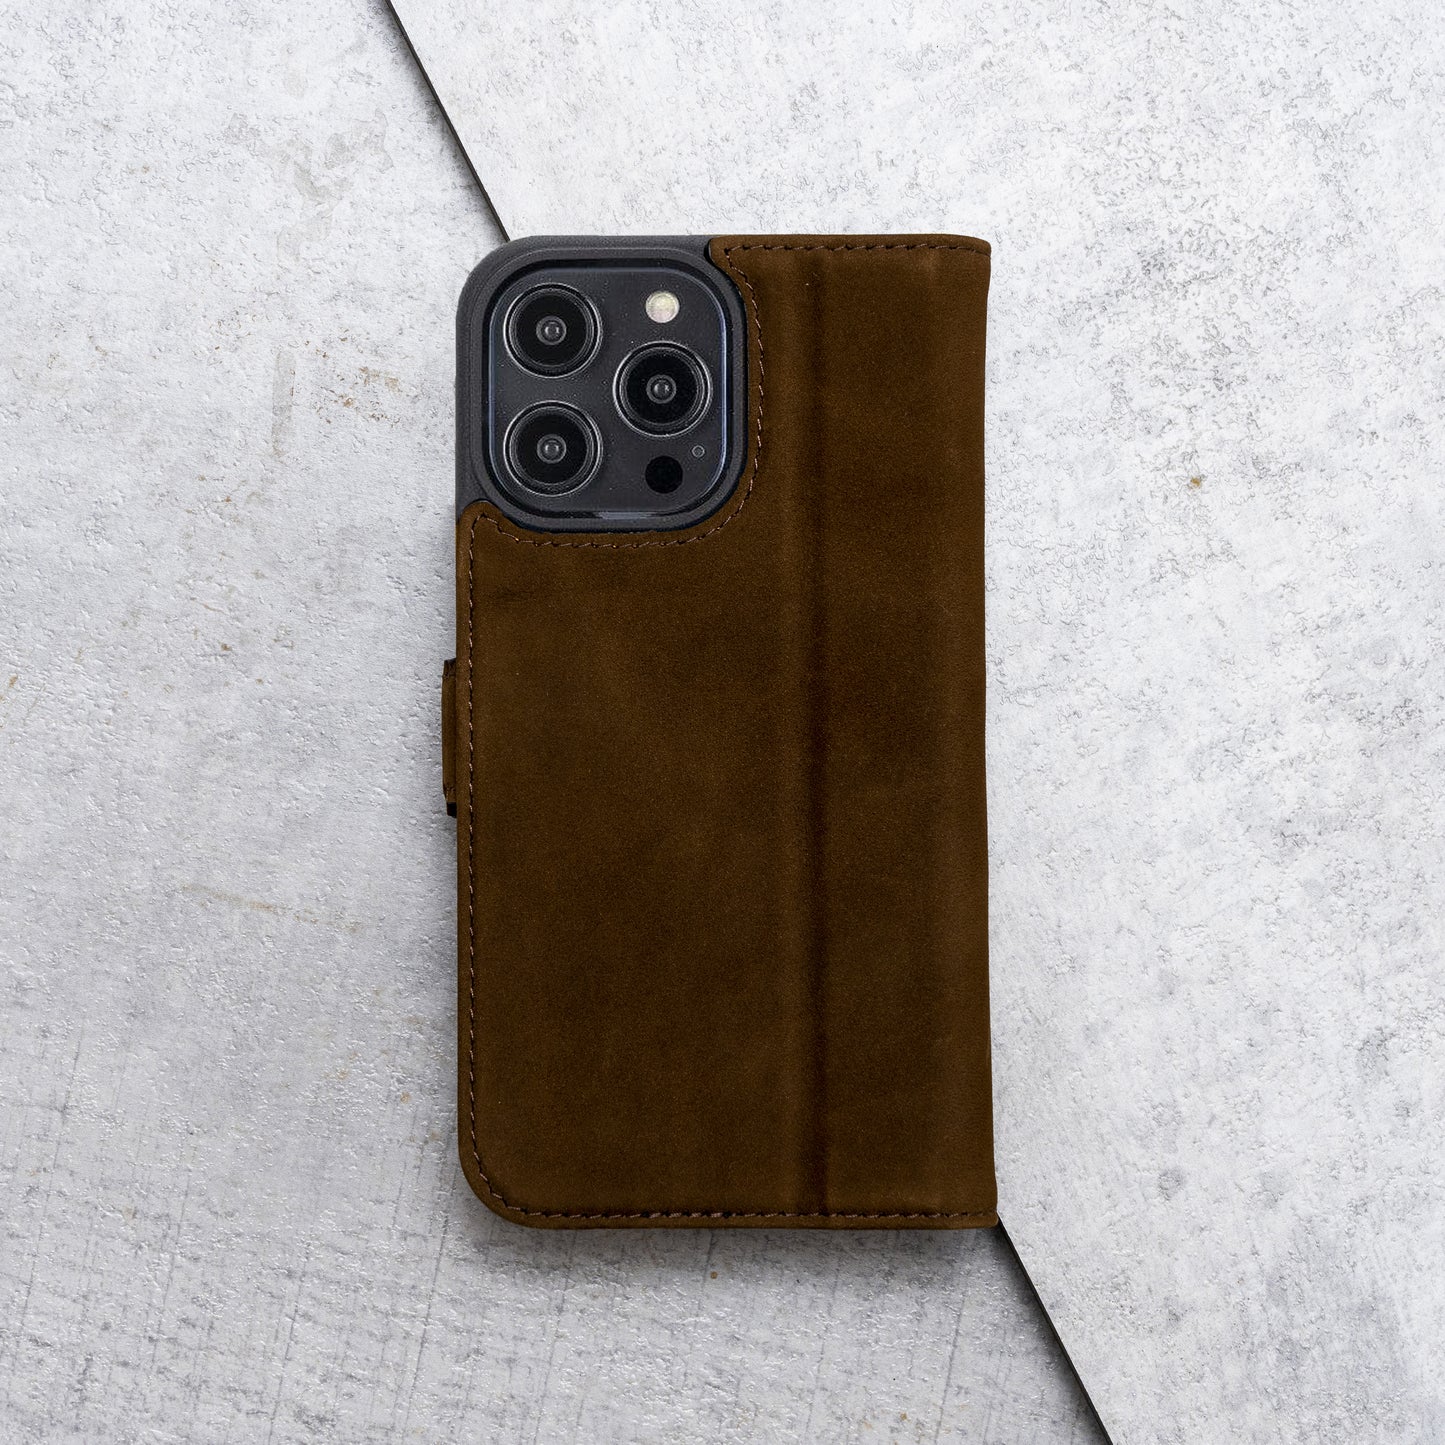 iPhone 13 Pro Leather Case. Premium Nubuck Genuine Leather Stand Case/Cover/Wallet (Chocolate Brown)